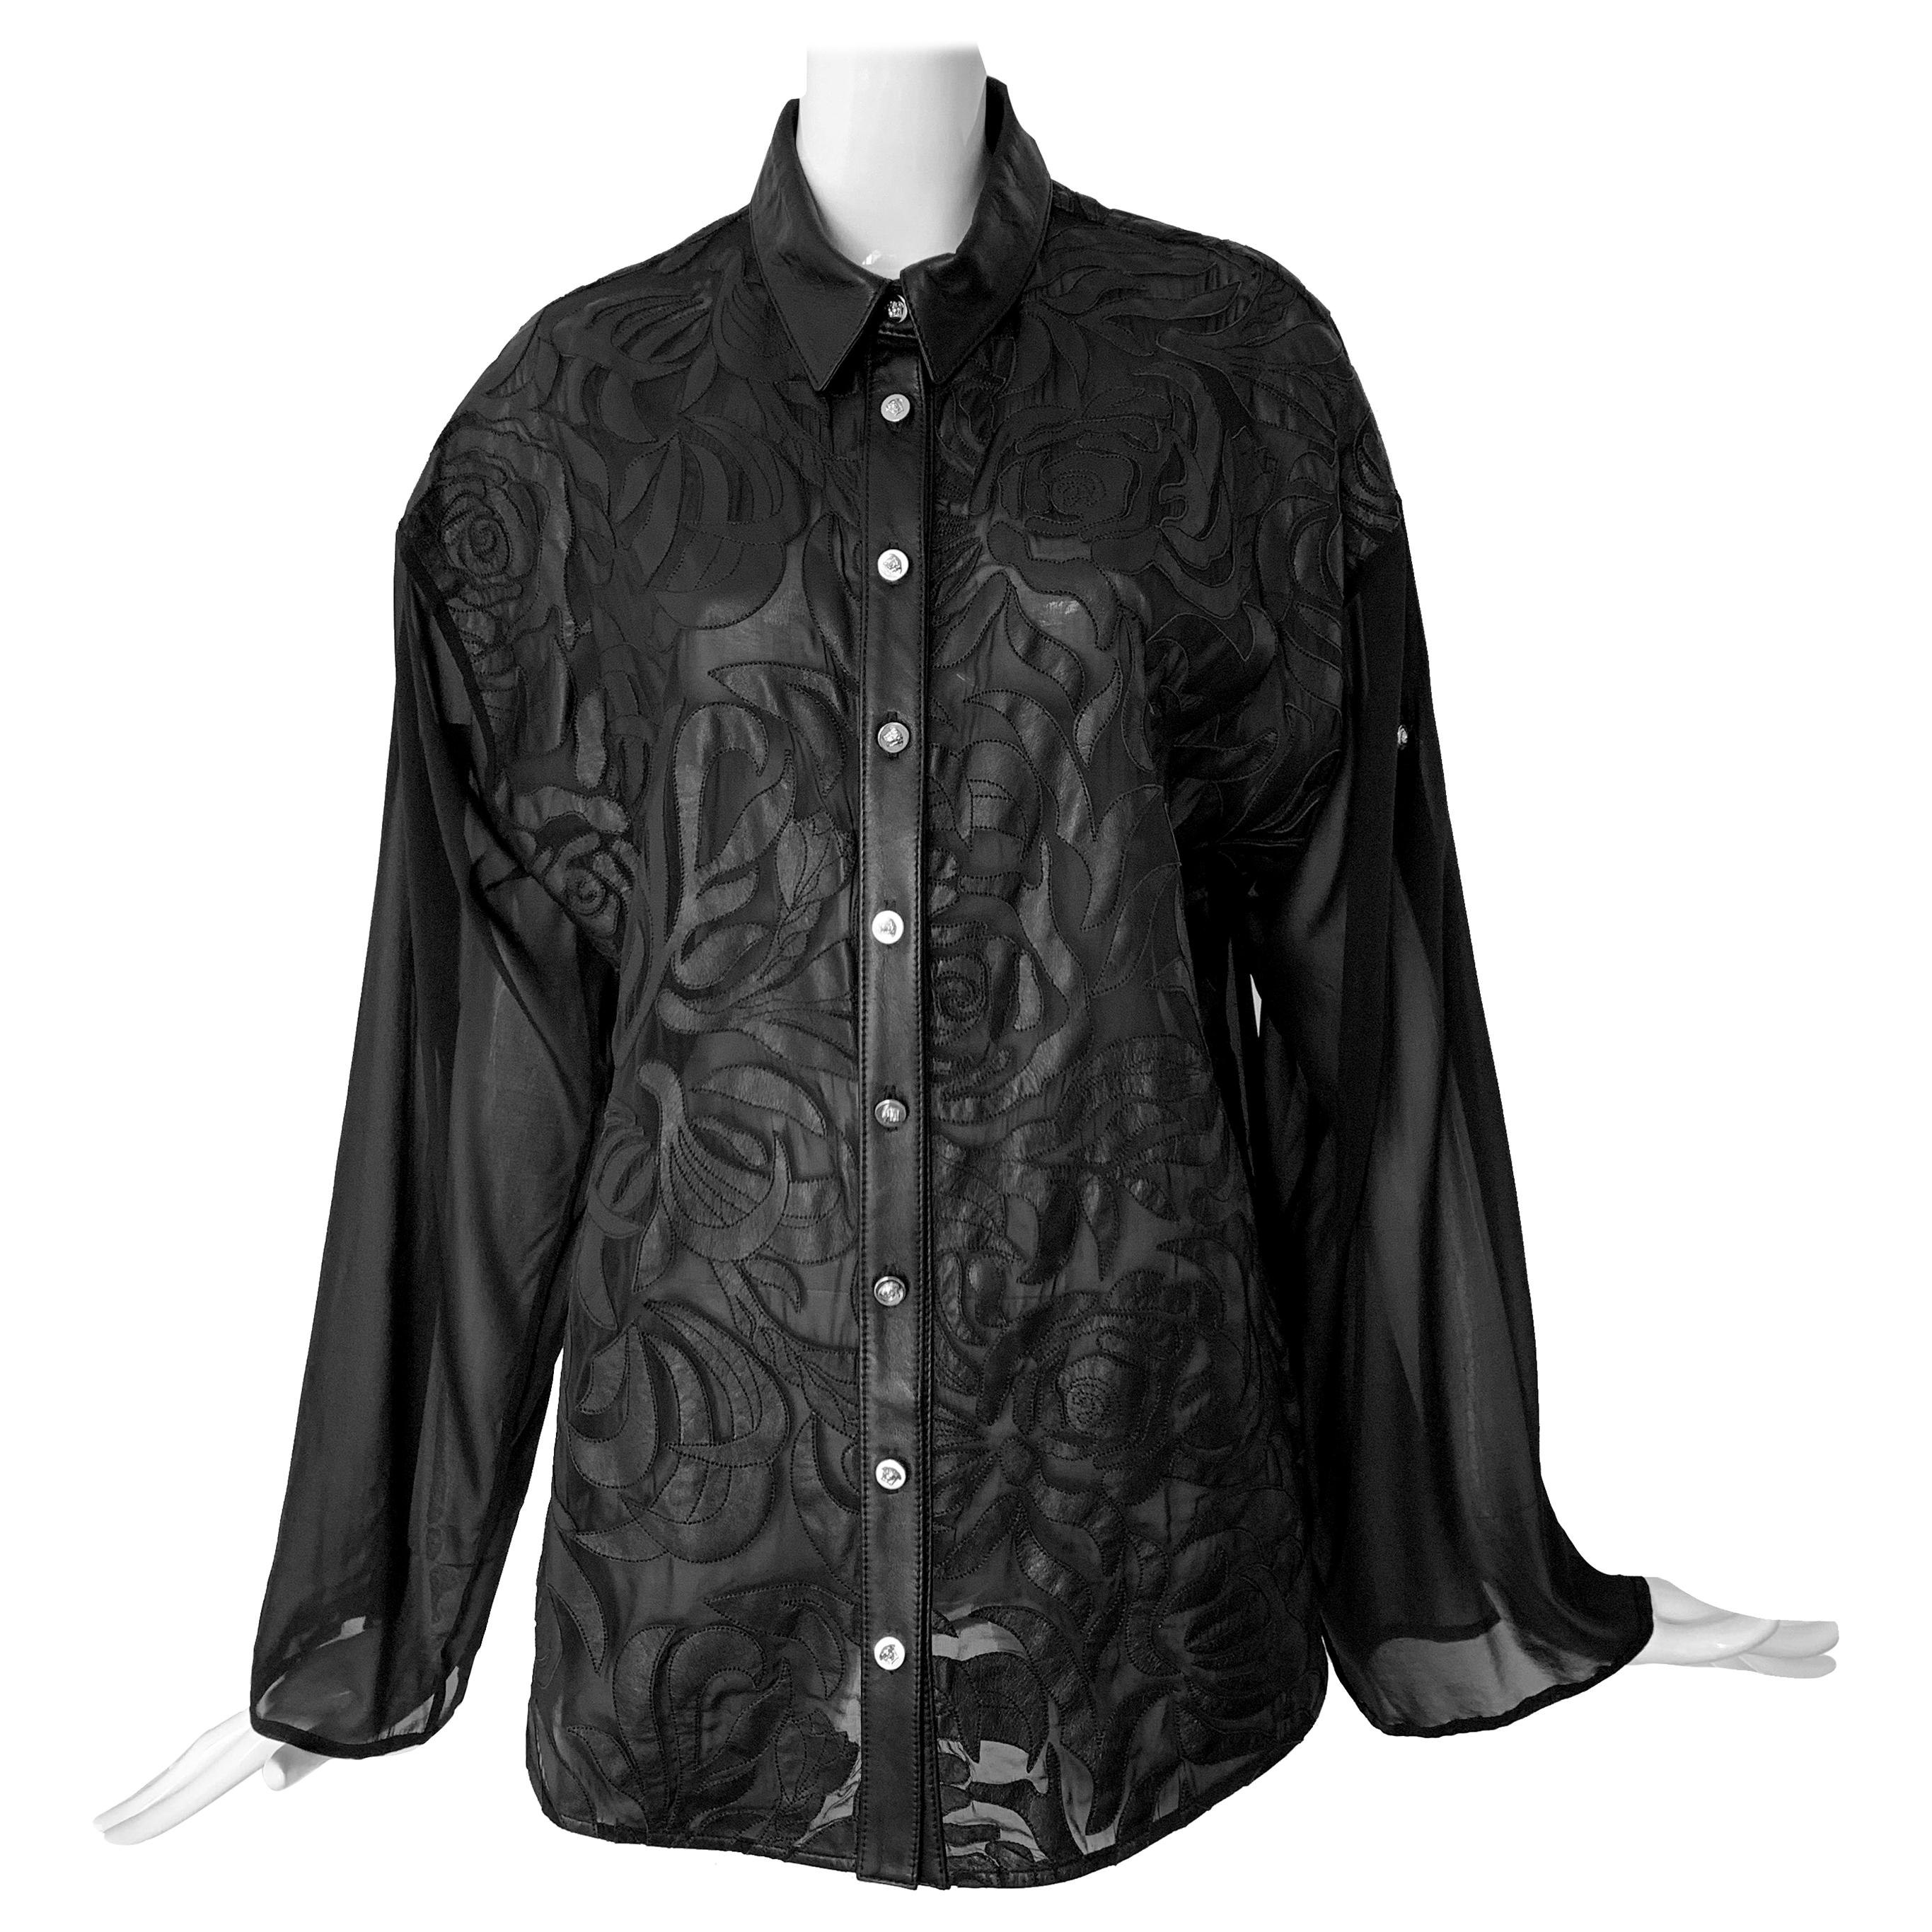 New Versace Silk Cut Out Leather Applique Shirt IT42 US 4-6 For Sale